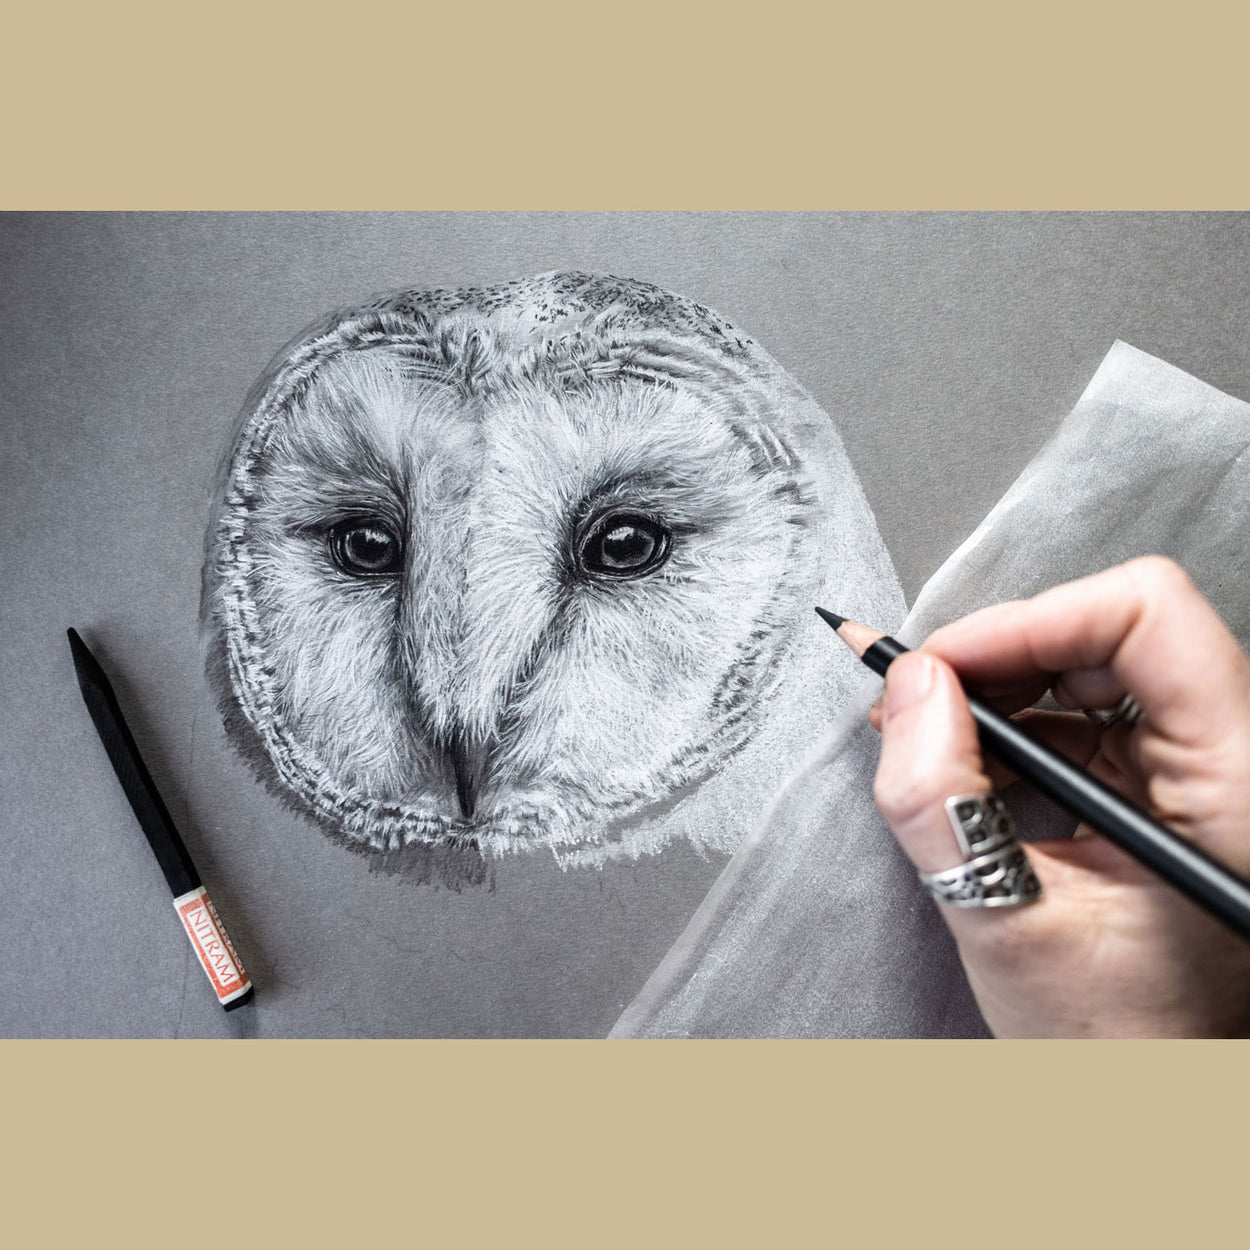 Barn Owl Charcoal Drawing in Progress - The Thriving Wild